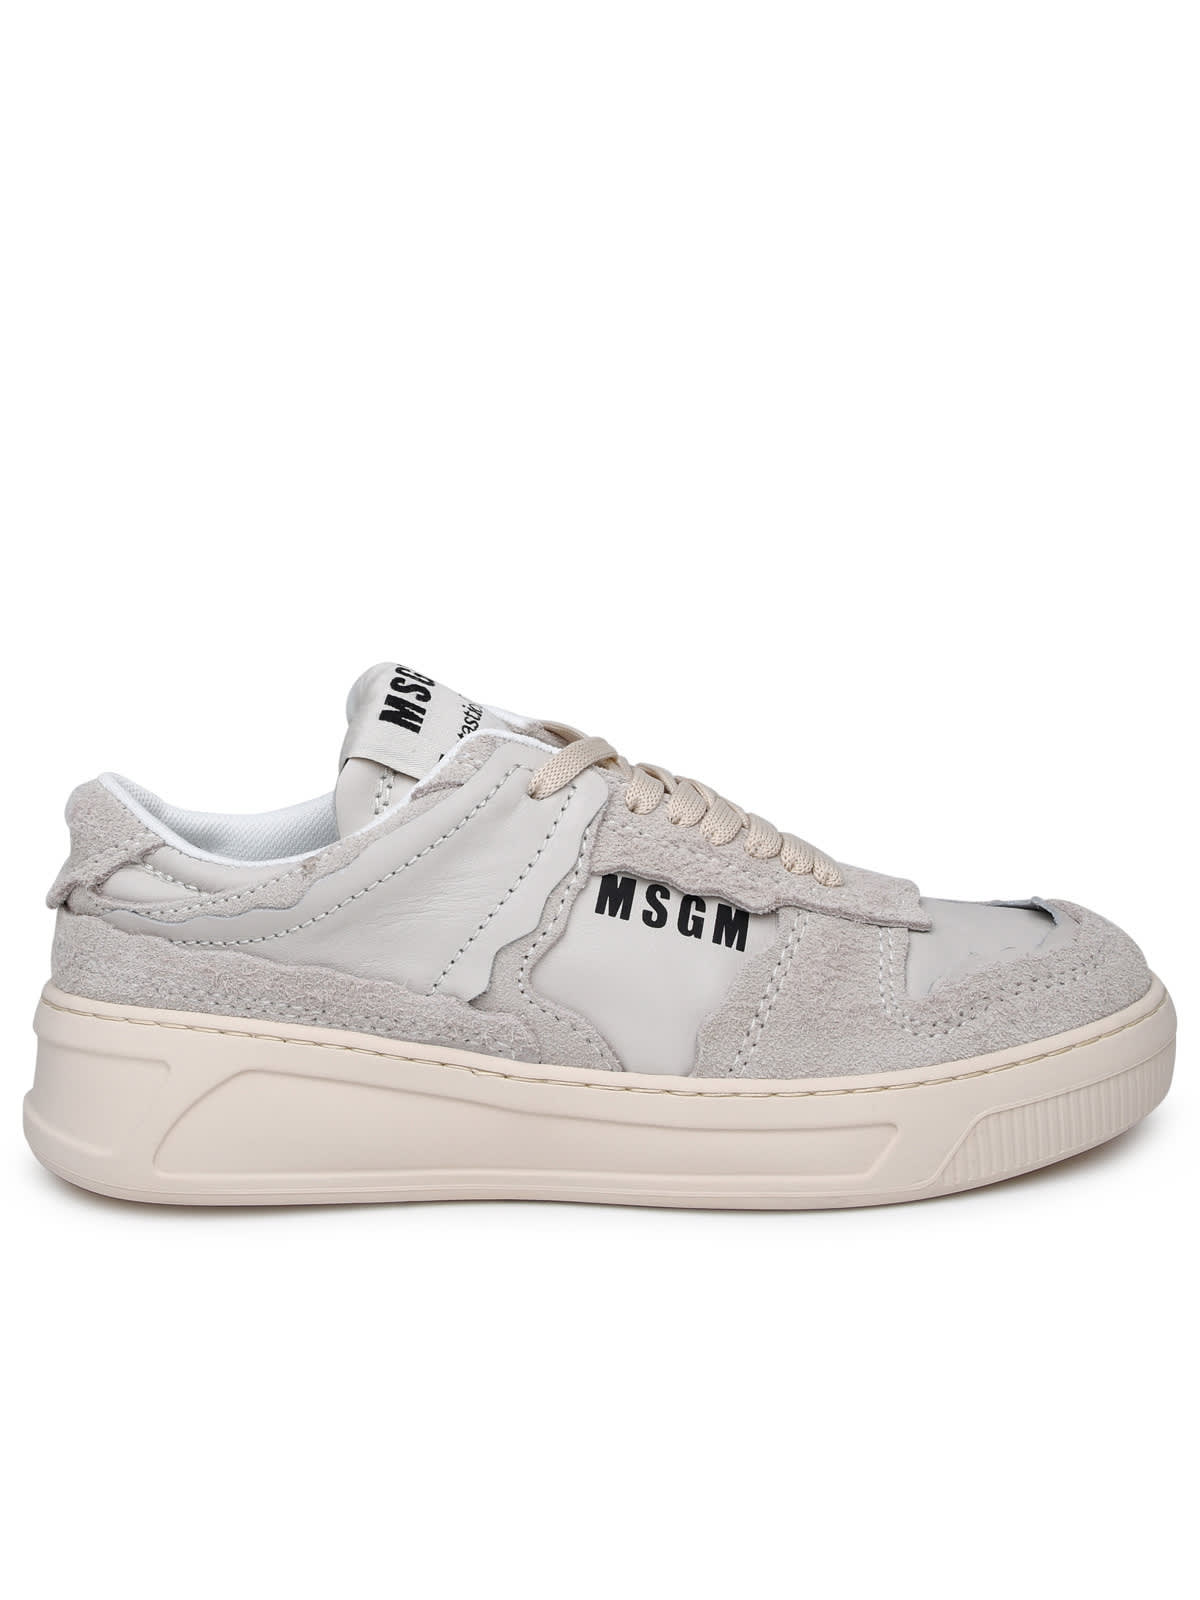 MSGM FG1 WHITE LEATHER SNEAKERS